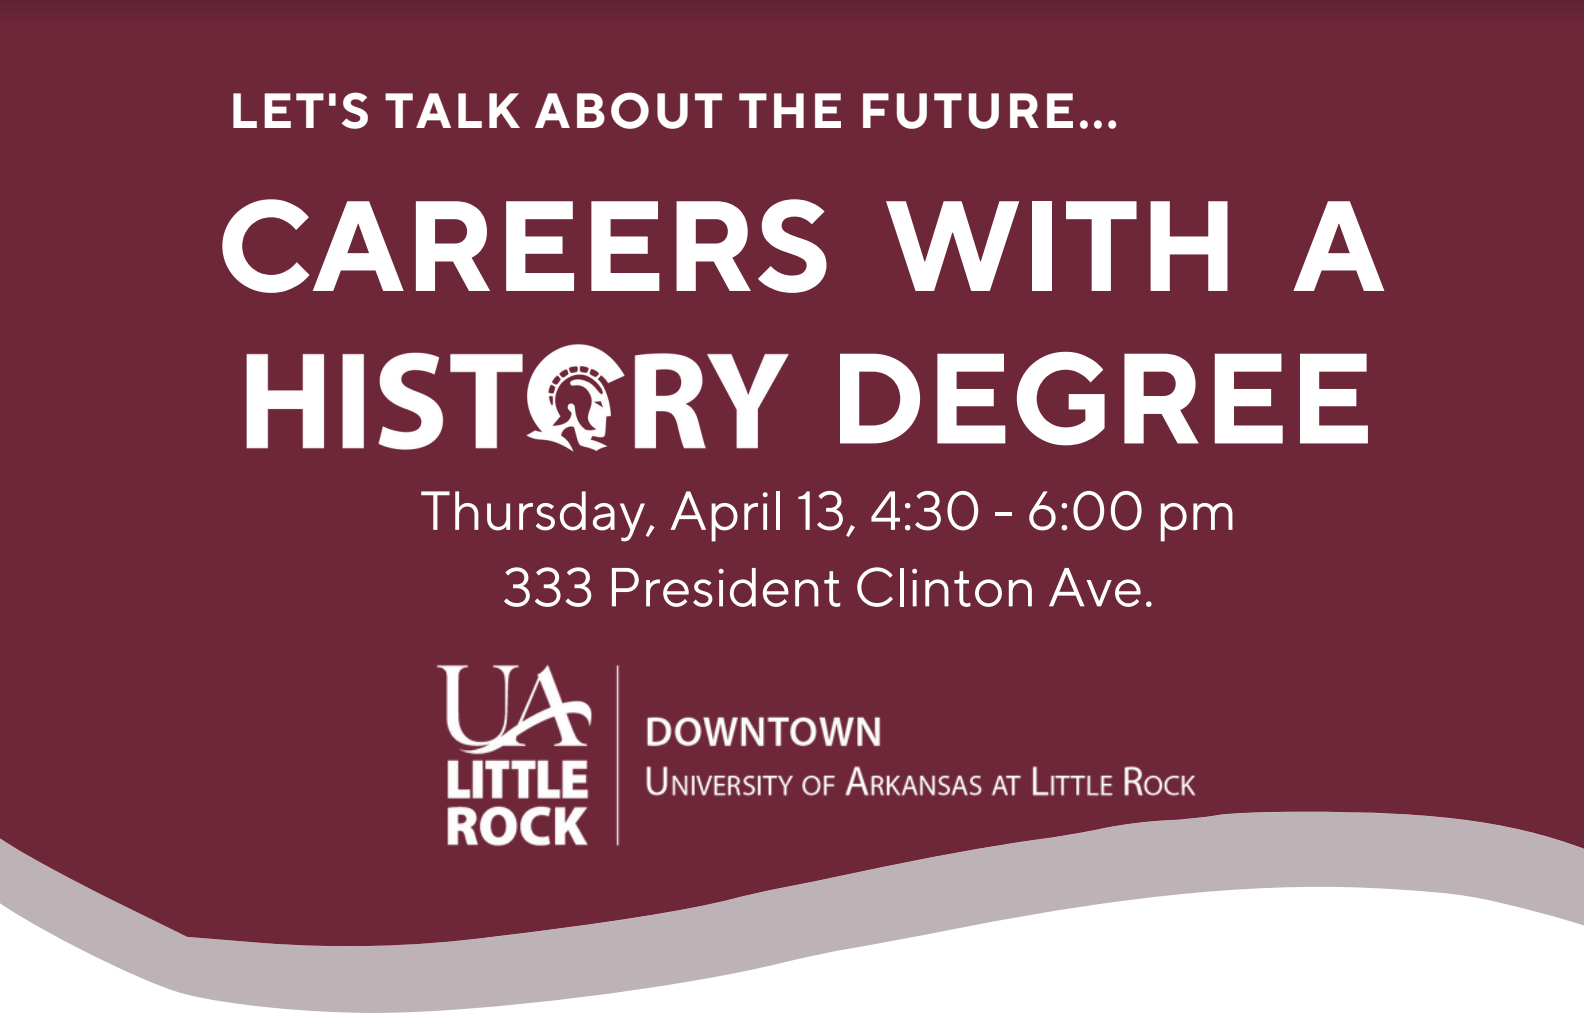 UA Little Rock Downtown, in collaboration with the UA Little Rock Department of History, will host a career and mentorship panel for history students and prospective students on Thursday, April 13.